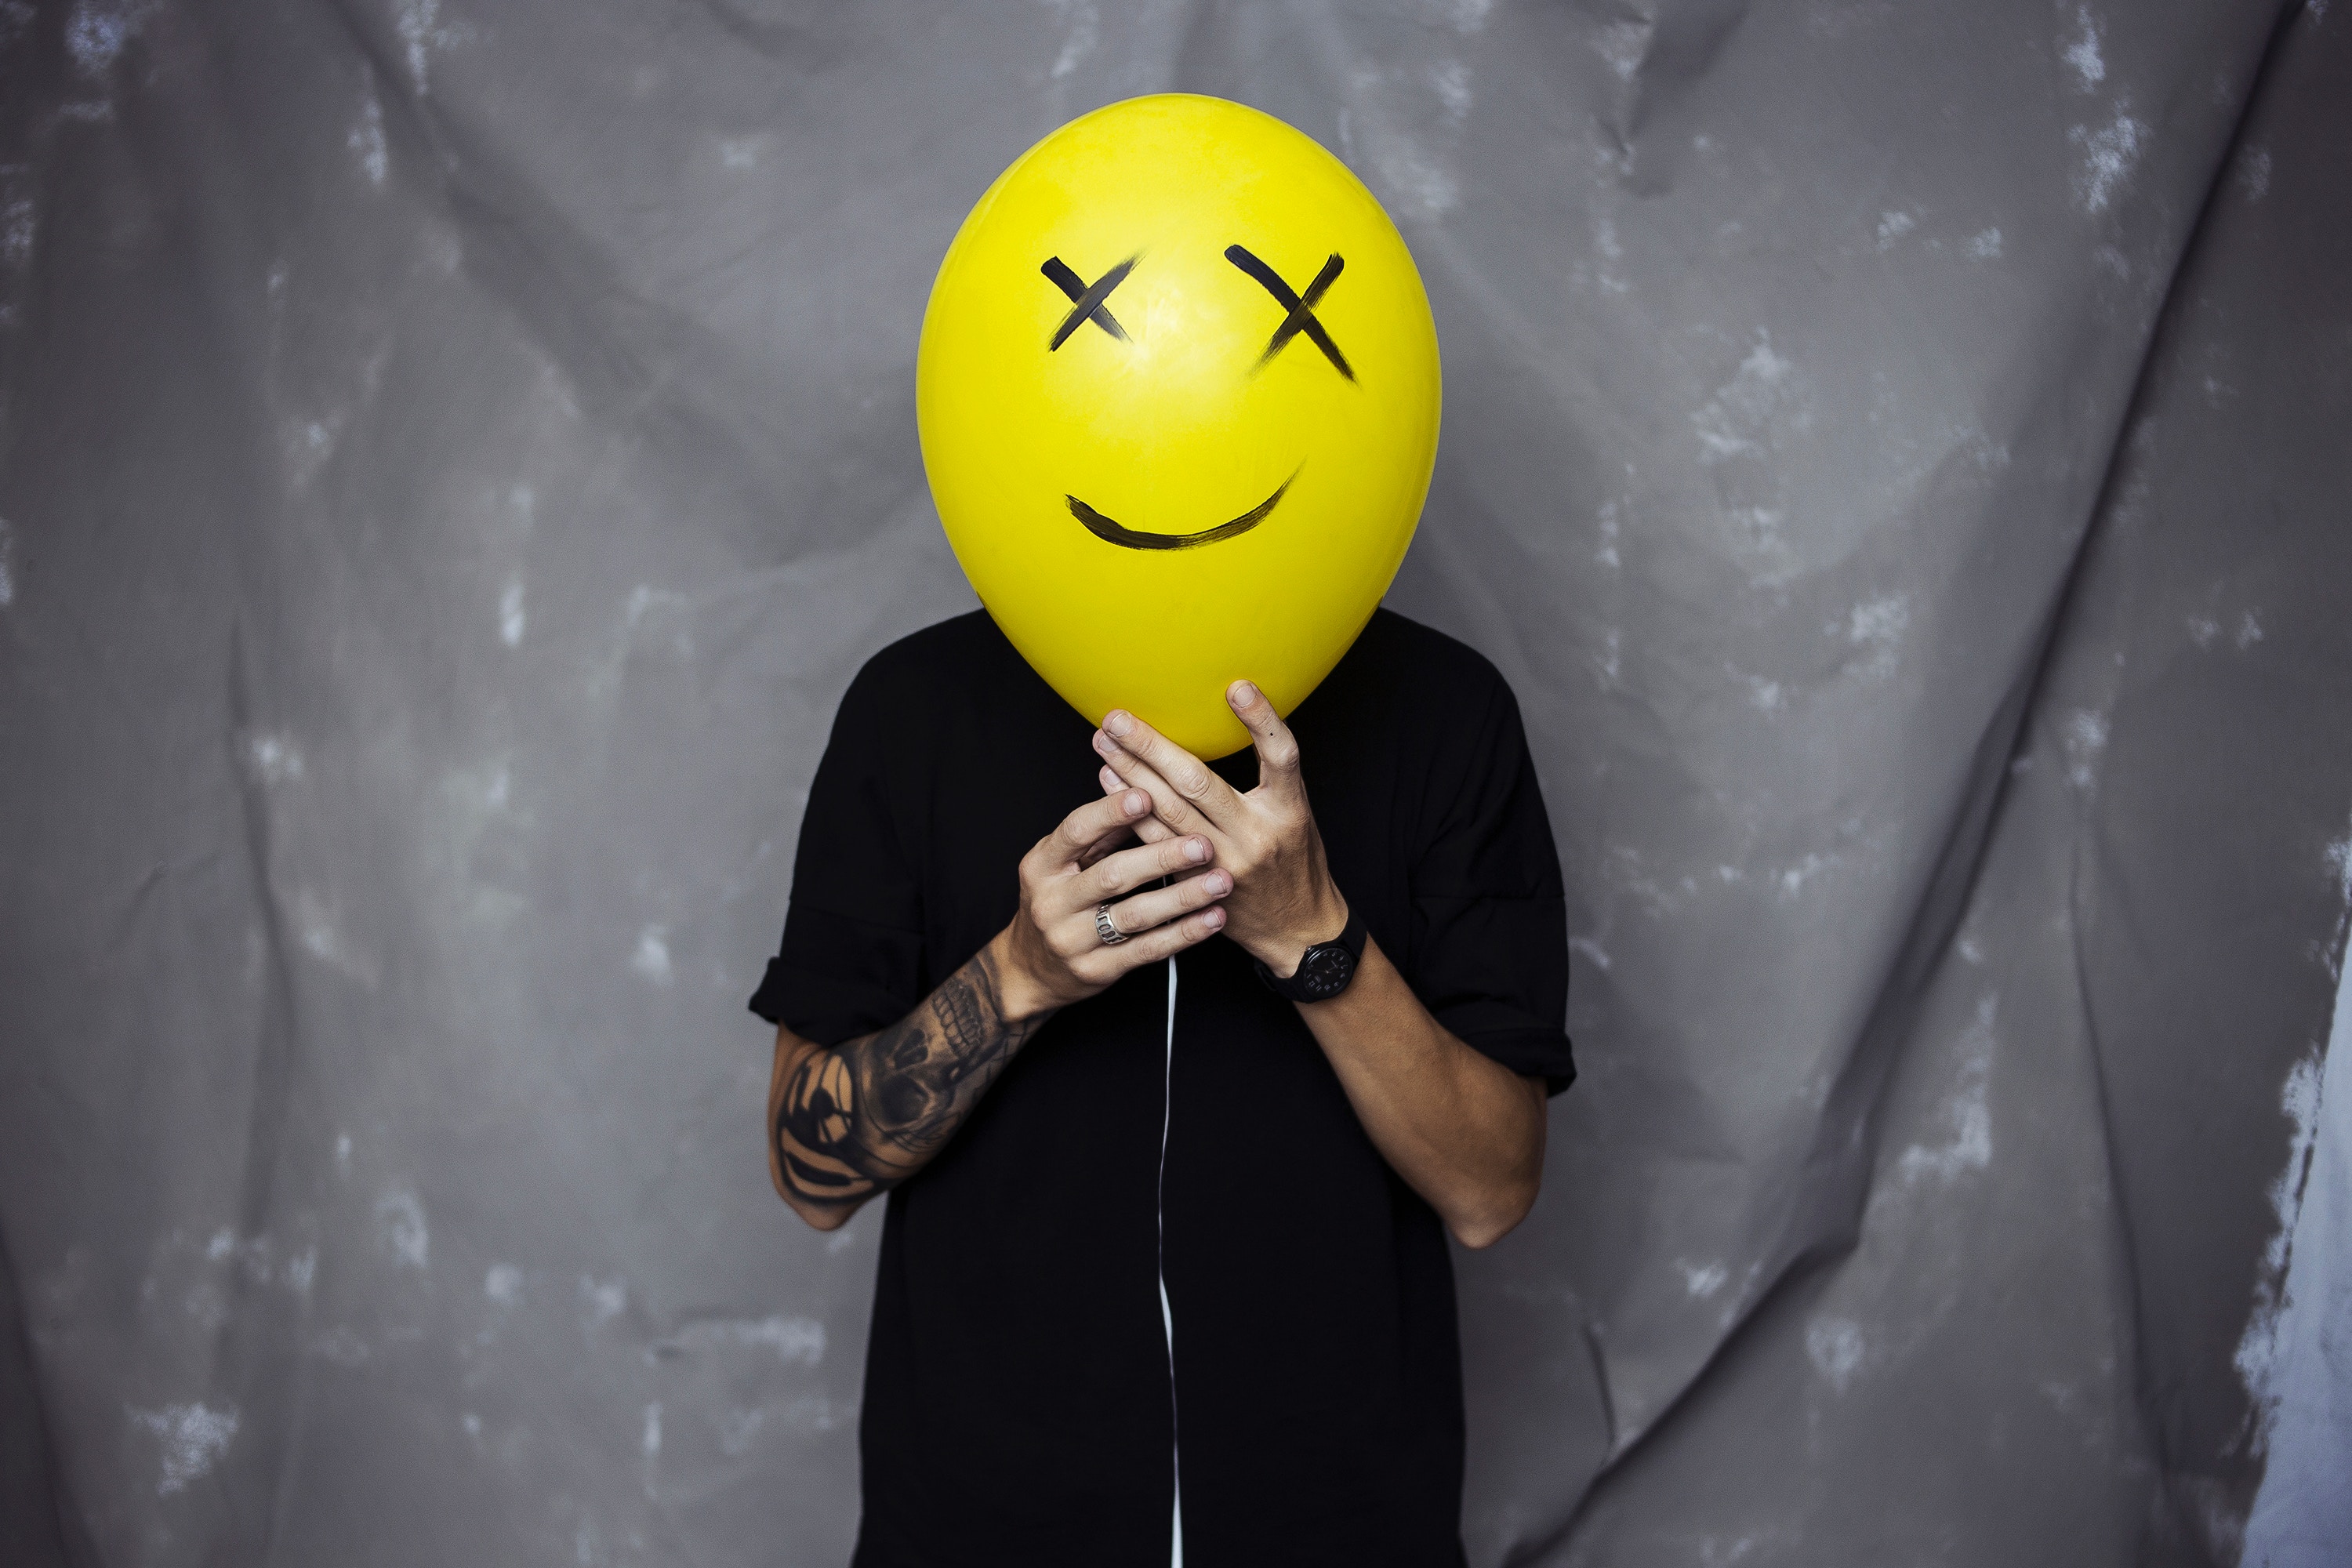 Wallpaper, men, photography, yellow, black, smiley, smile, smiling, balloon, happy face, shirt, grey, gray background, clocks, tattoo sleeve, portrait, hands 3000x2000